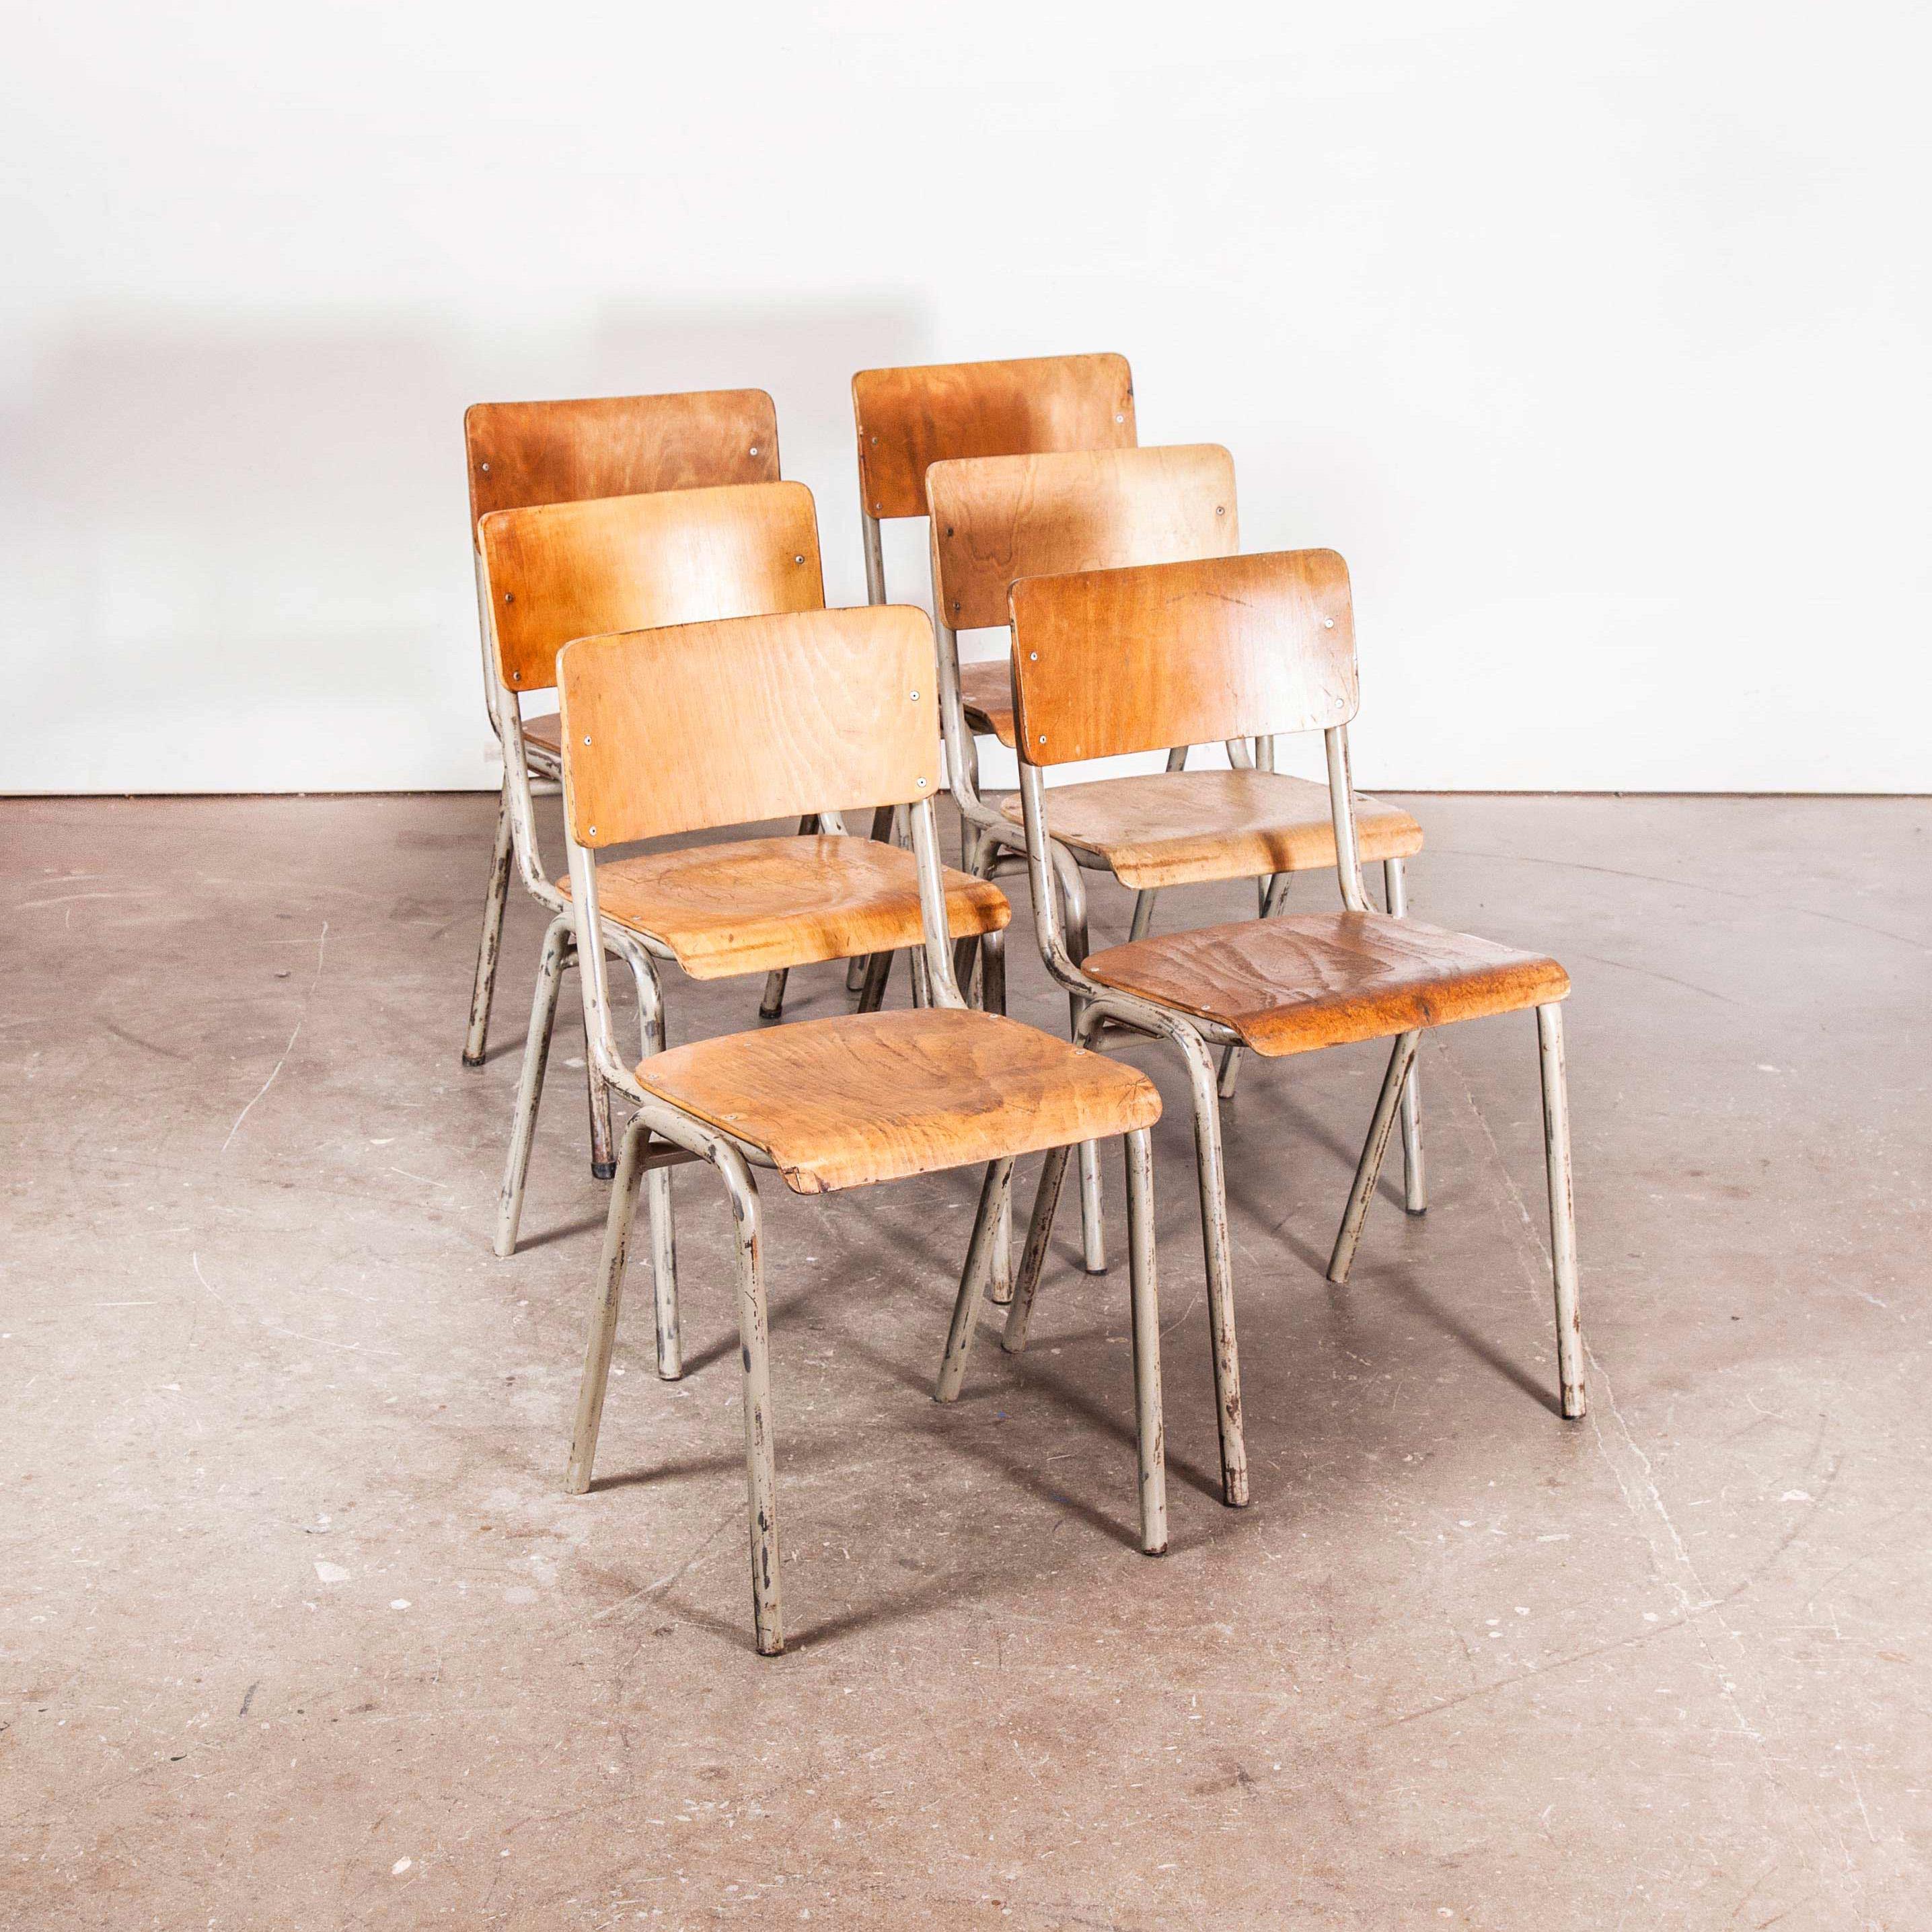 1950s Tubax Belgian Air Force stacking metal frame dining – Café chairs – Set of six
1950s original Tubax Belgian stacking metal frame dining – café chairs – Set of six. Sourced from a Belgian Air Force base, they have a strong metal frame with